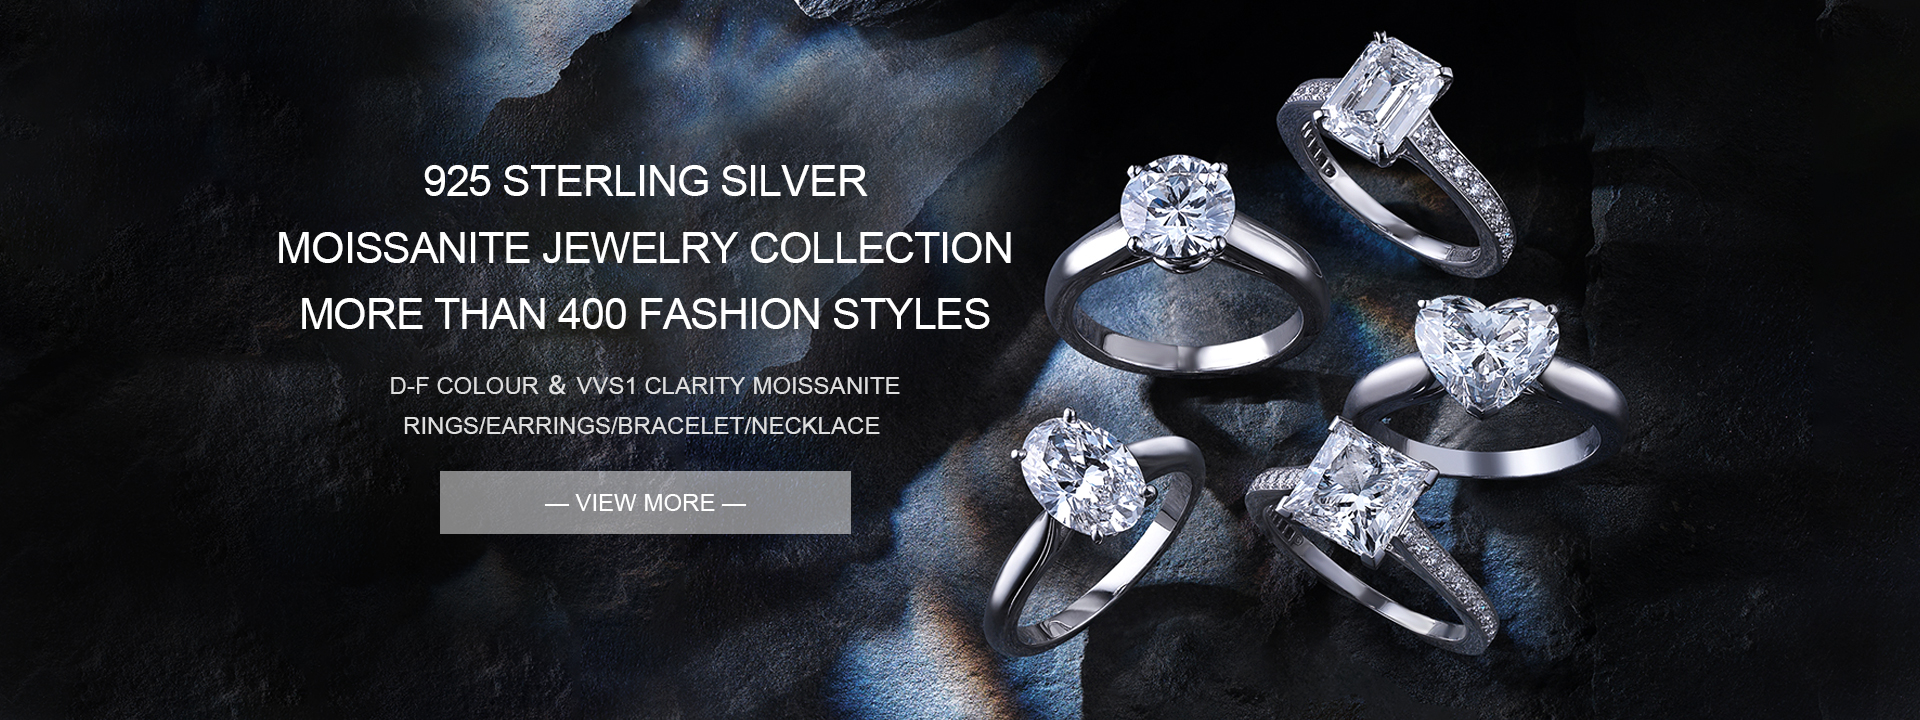 moissanite silver jewelry collection